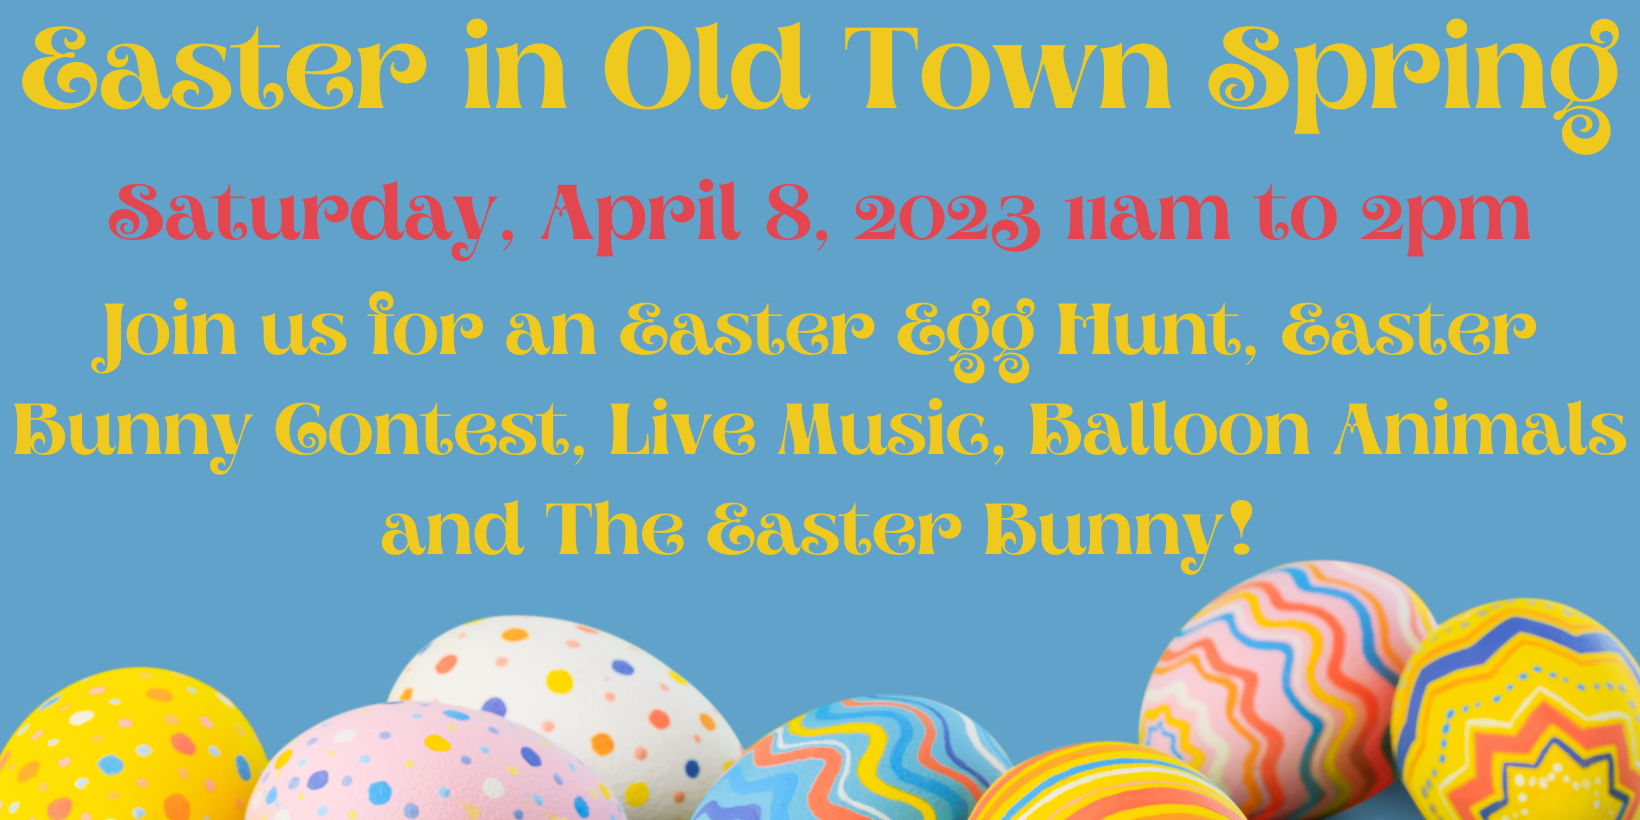 Annual Easter Event in Old Town Spring promotional image